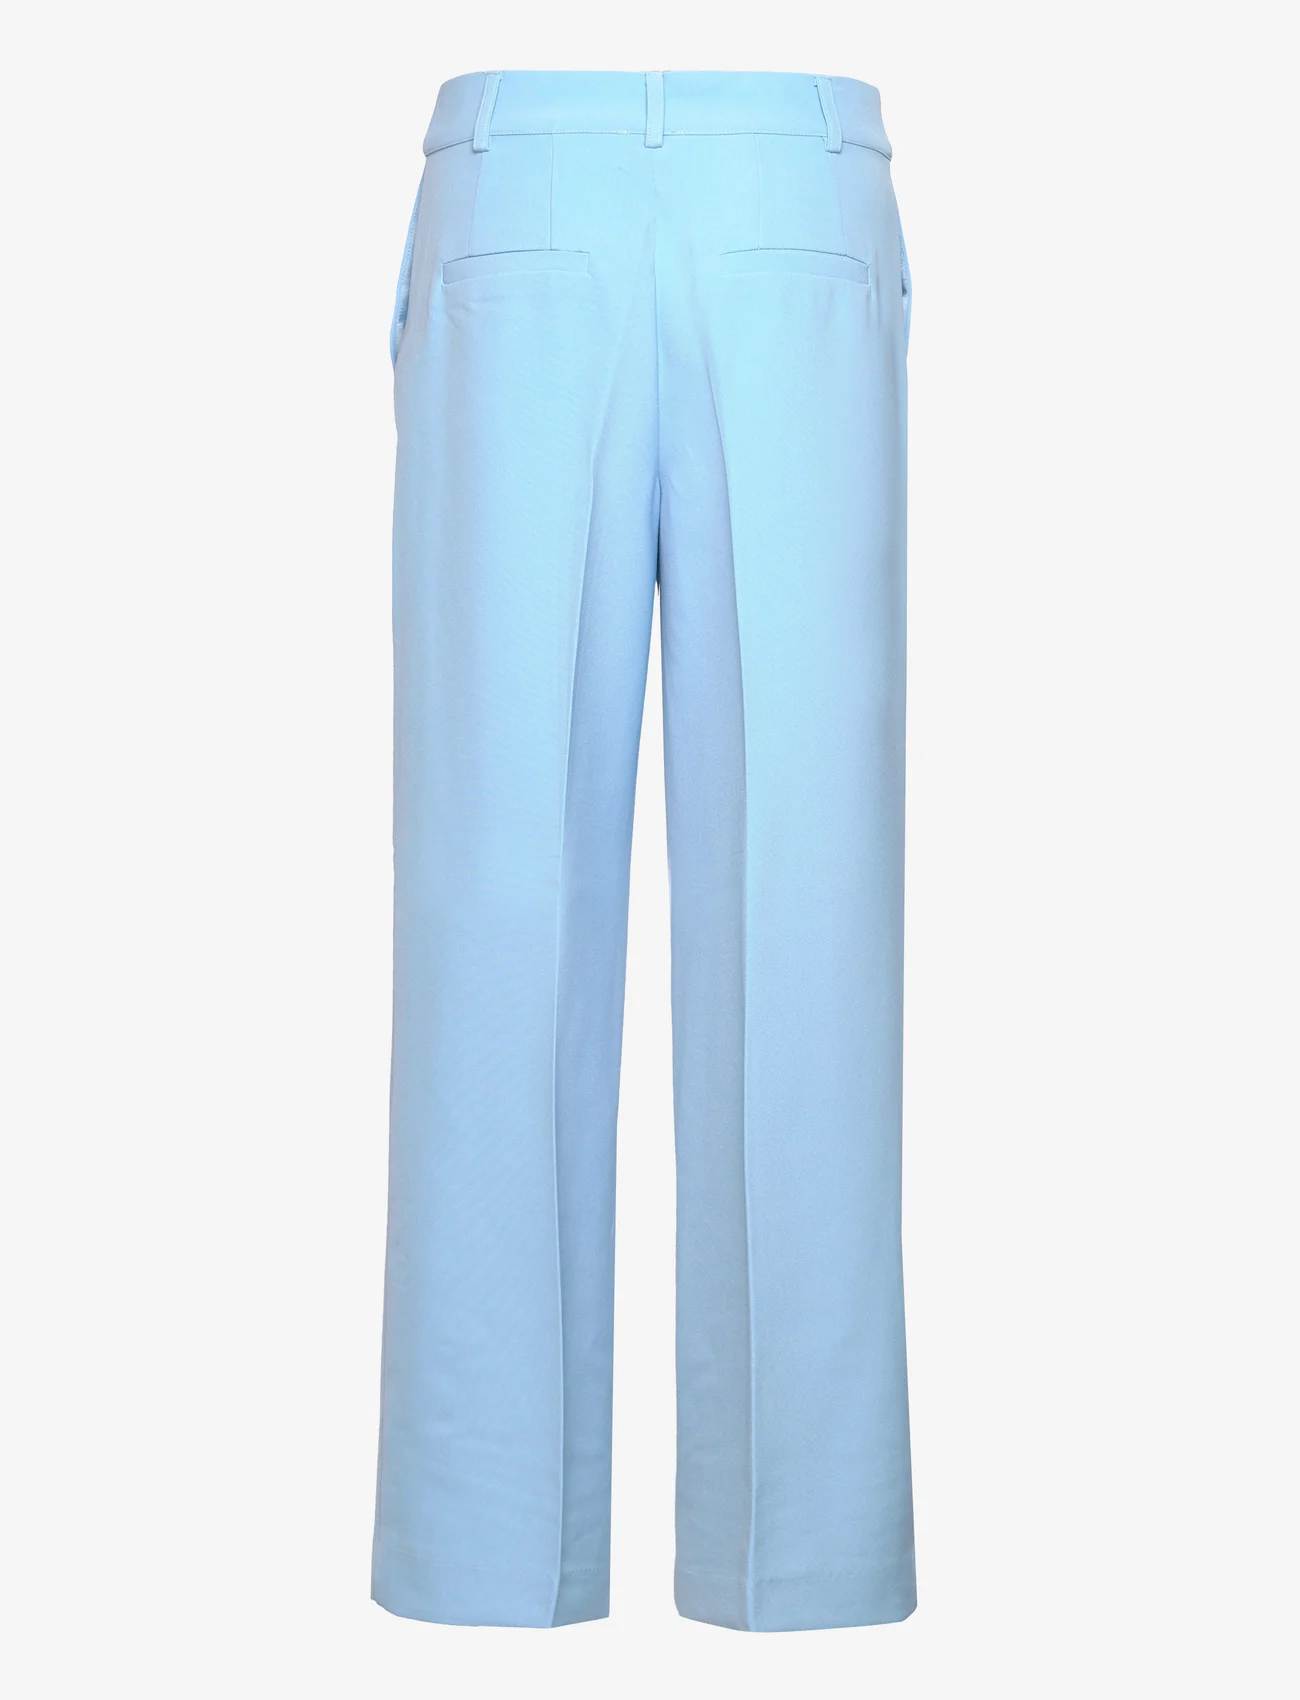 My Essential Wardrobe - 29 THE TAILORED PANT - puvunhousut - airy blue - 1